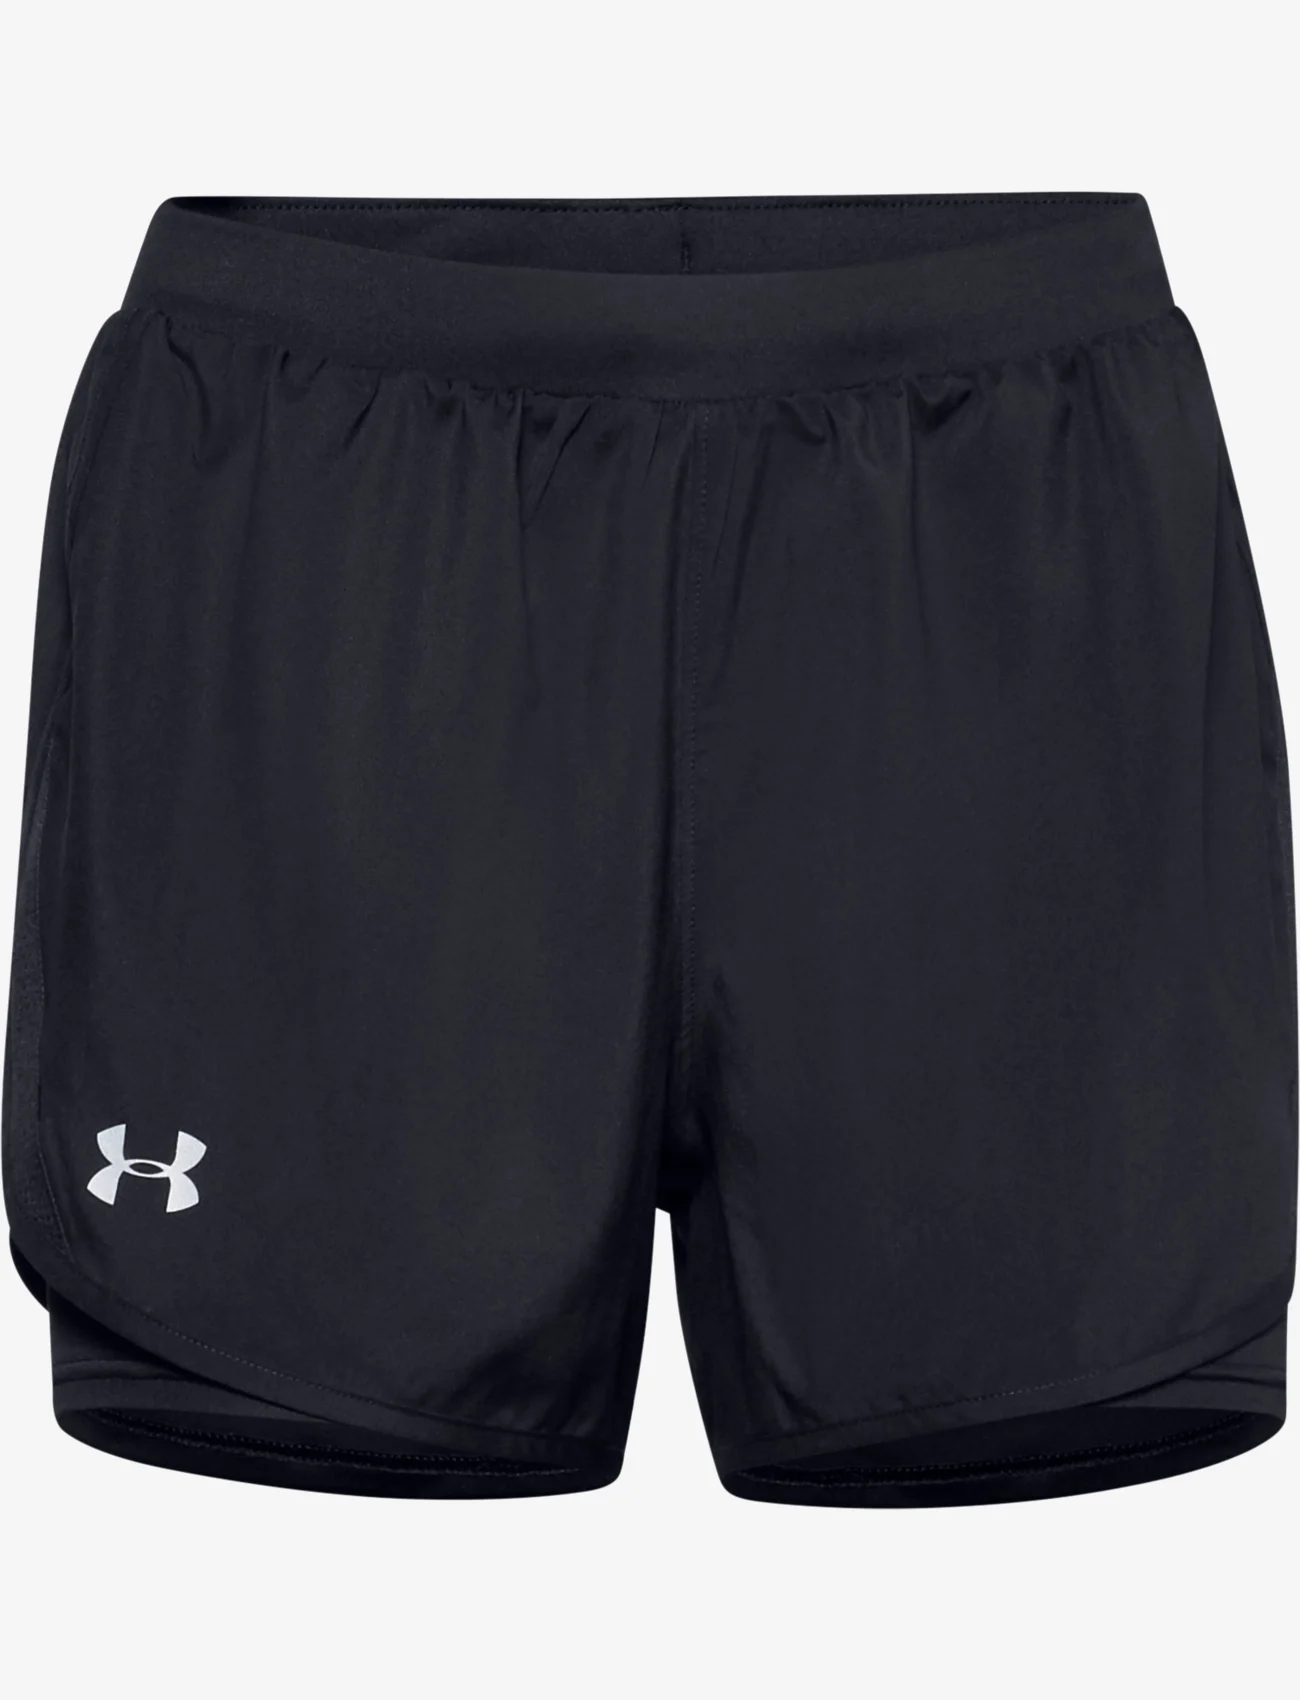 Under Armour - UA Fly By 2.0 2N1 Short - trening shorts - black - 0